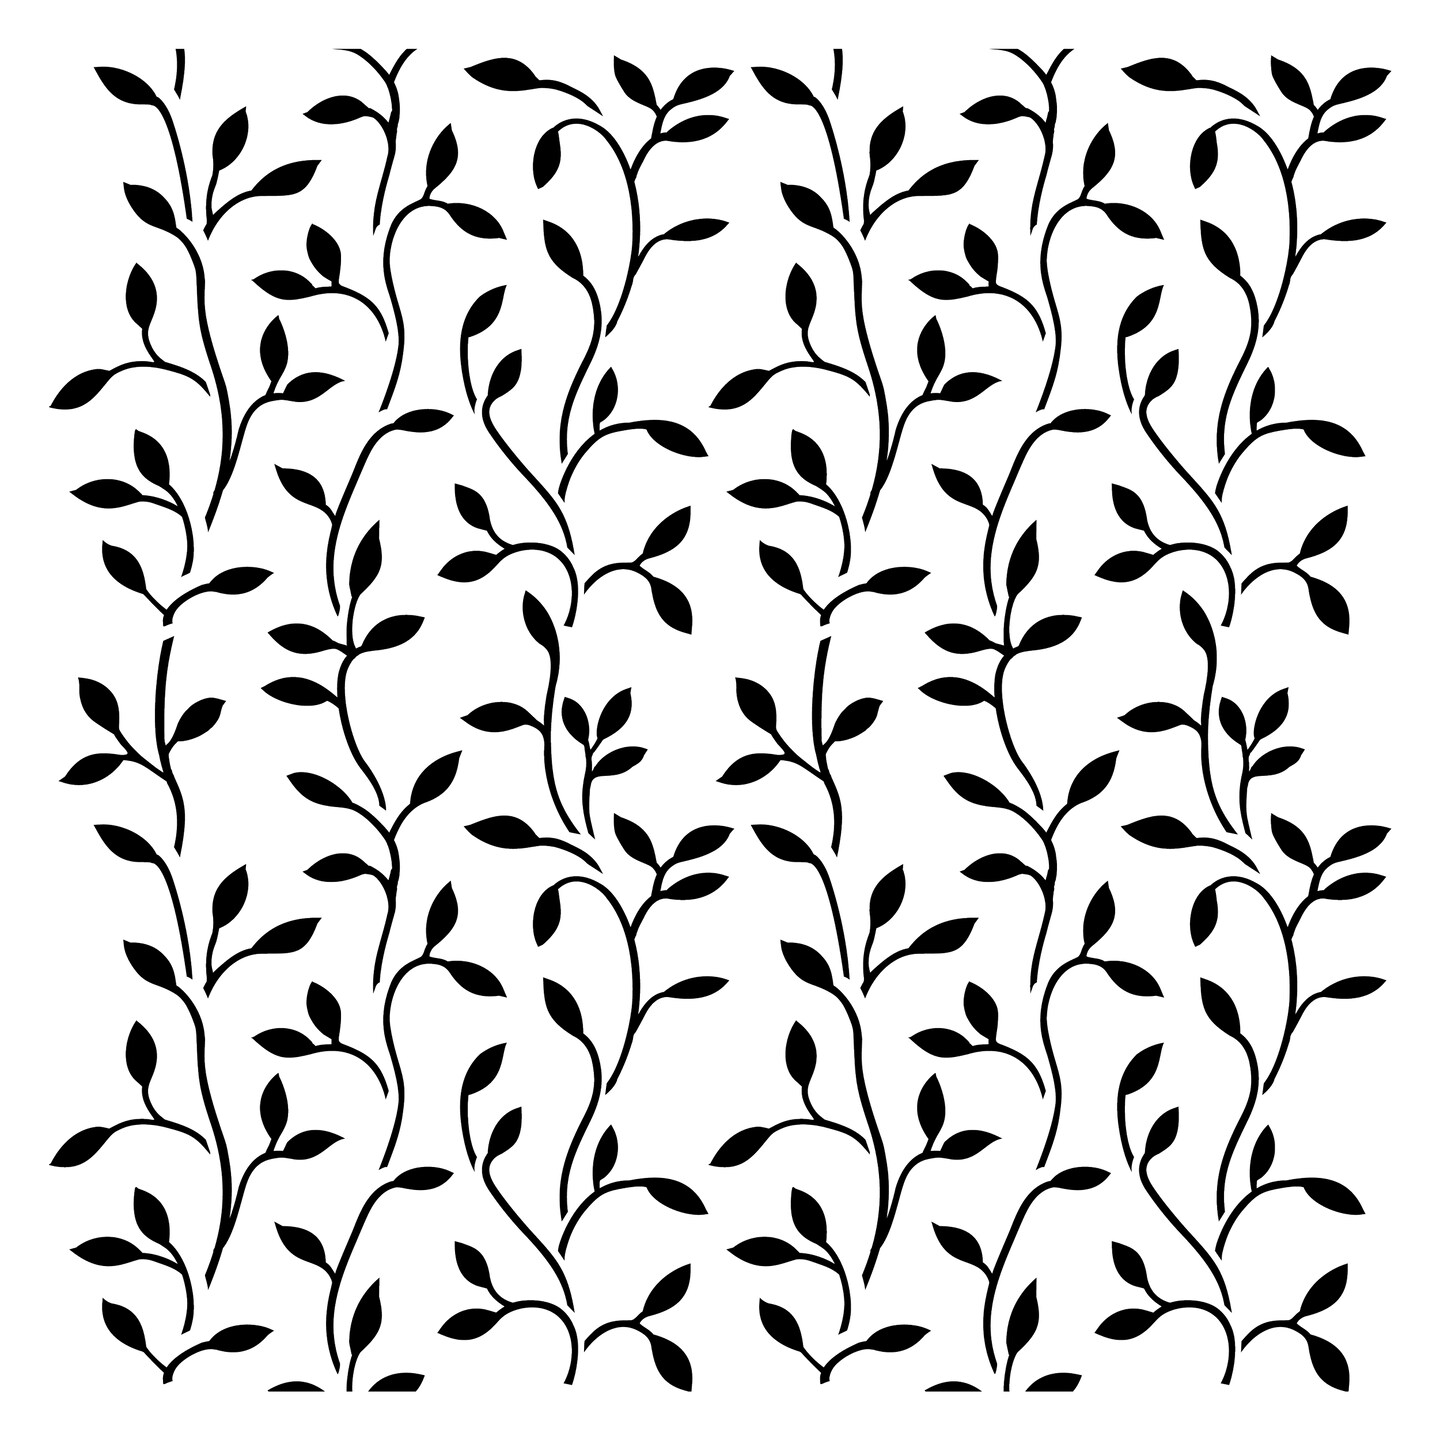 Climbing Vine All Over Embossing 12 x 12 Stencil | FS119 by Designer Stencils | Pattern Stencils | Reusable Stencils for Painting on Wood, Wall, Tile, Canvas, Paper, Fabric, Furniture, Floor | Try Instead of a Wallpaper | Easy to Use &#x26; Clean